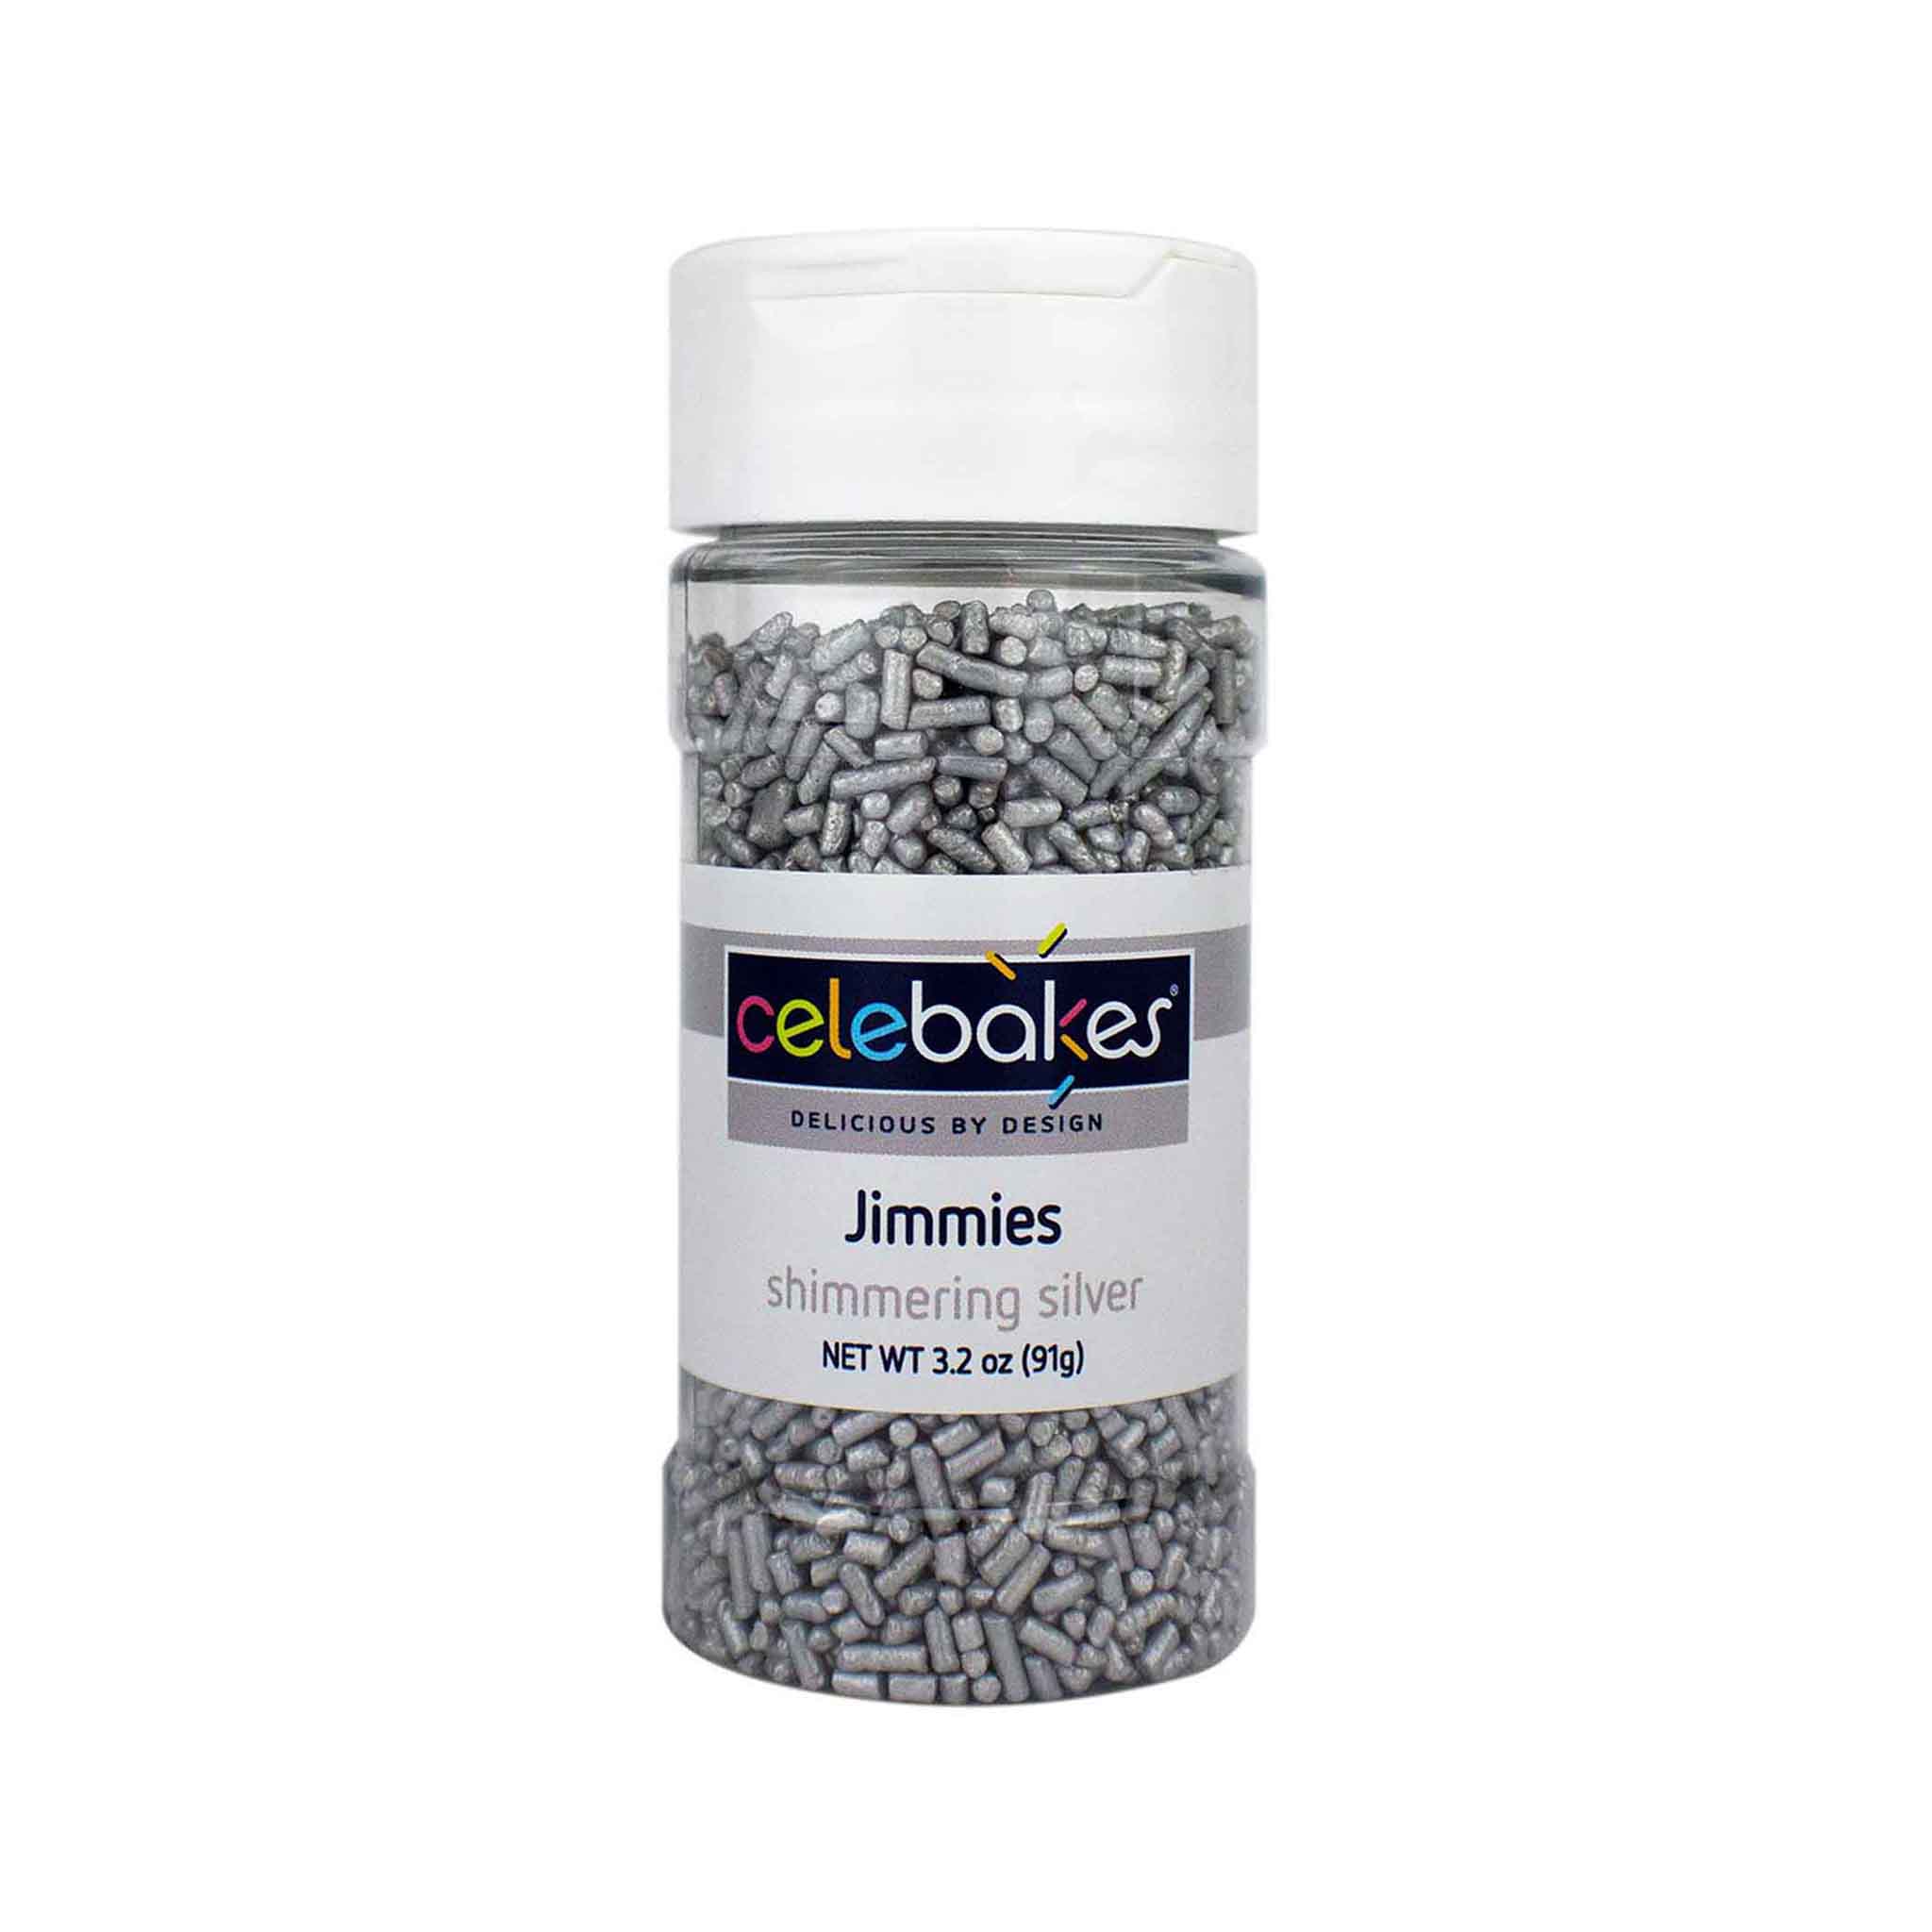 Celebakes Shimmering Silver Jimmies for Cake Decoration